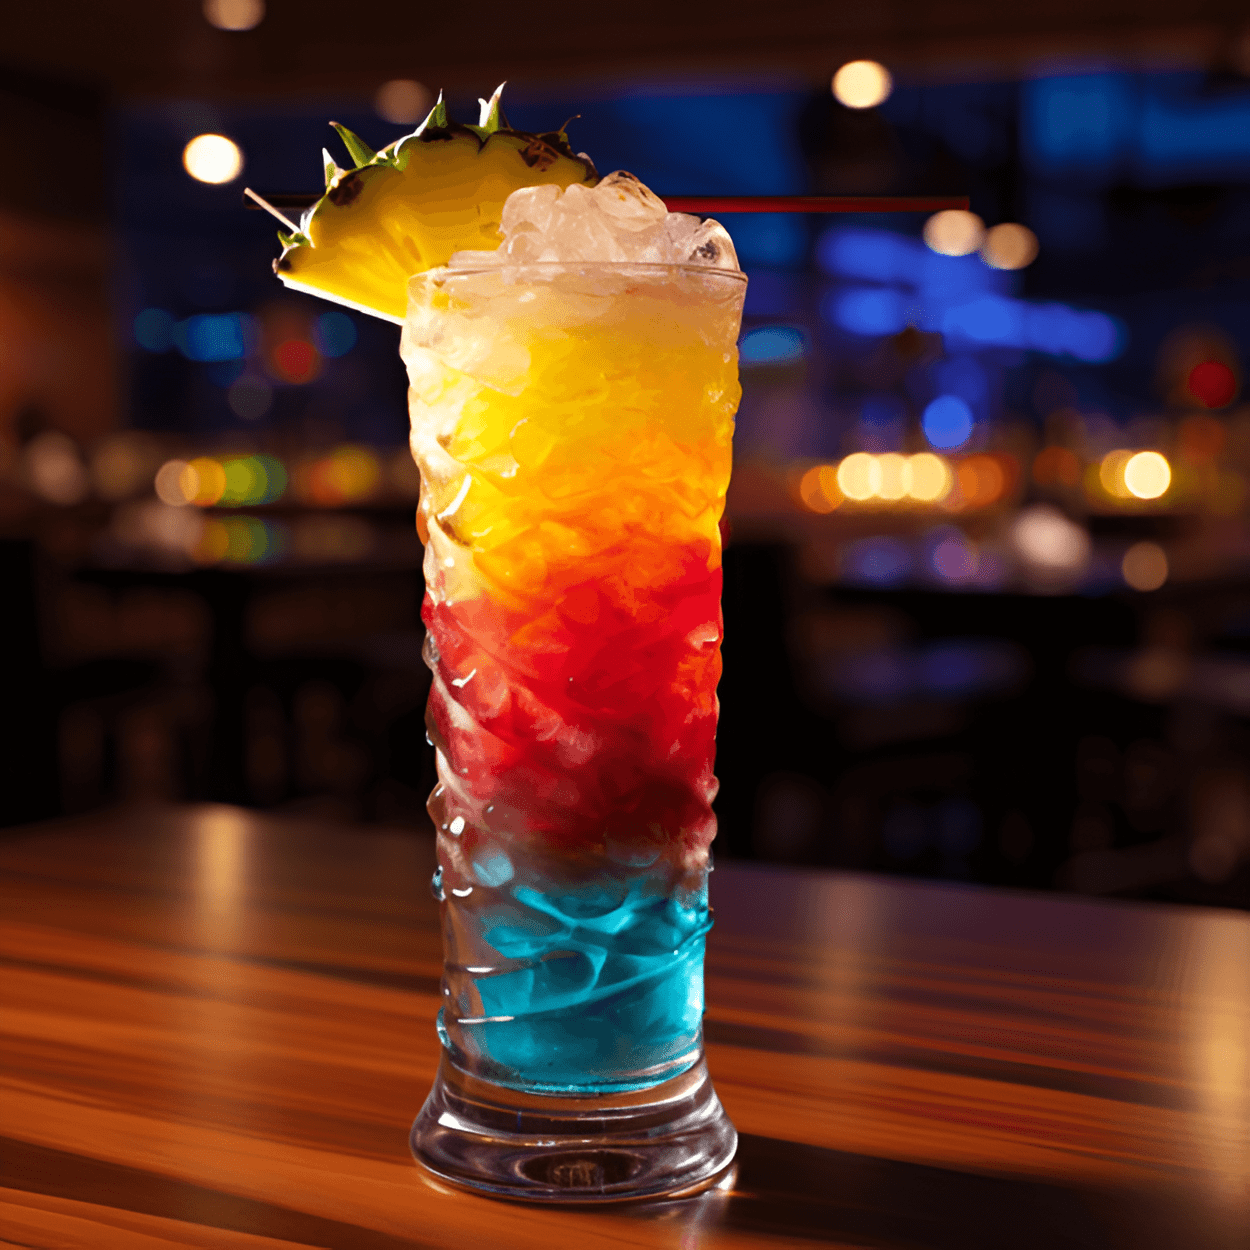 Rainbow Cocktail Recipe - The Rainbow Cocktail is a sweet and fruity drink. It's a mix of tropical flavors, with a hint of citrus and a smooth, creamy finish. The different layers each bring their own unique taste, creating a cocktail that's full of flavor and fun to drink.